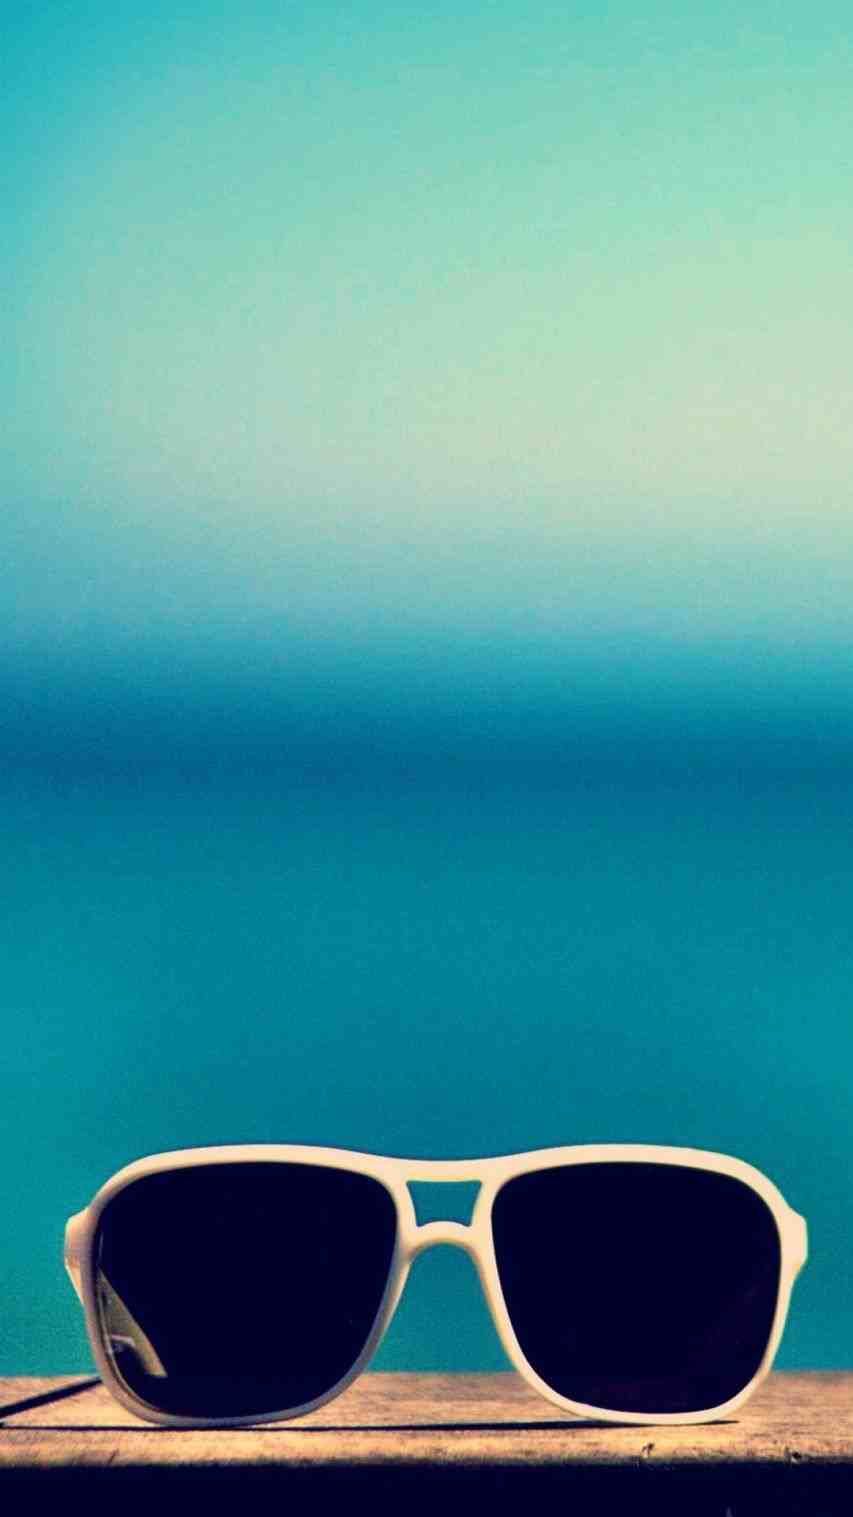 Cute iPhone Teal Wallpapers - Top Free Cute iPhone Teal Backgrounds